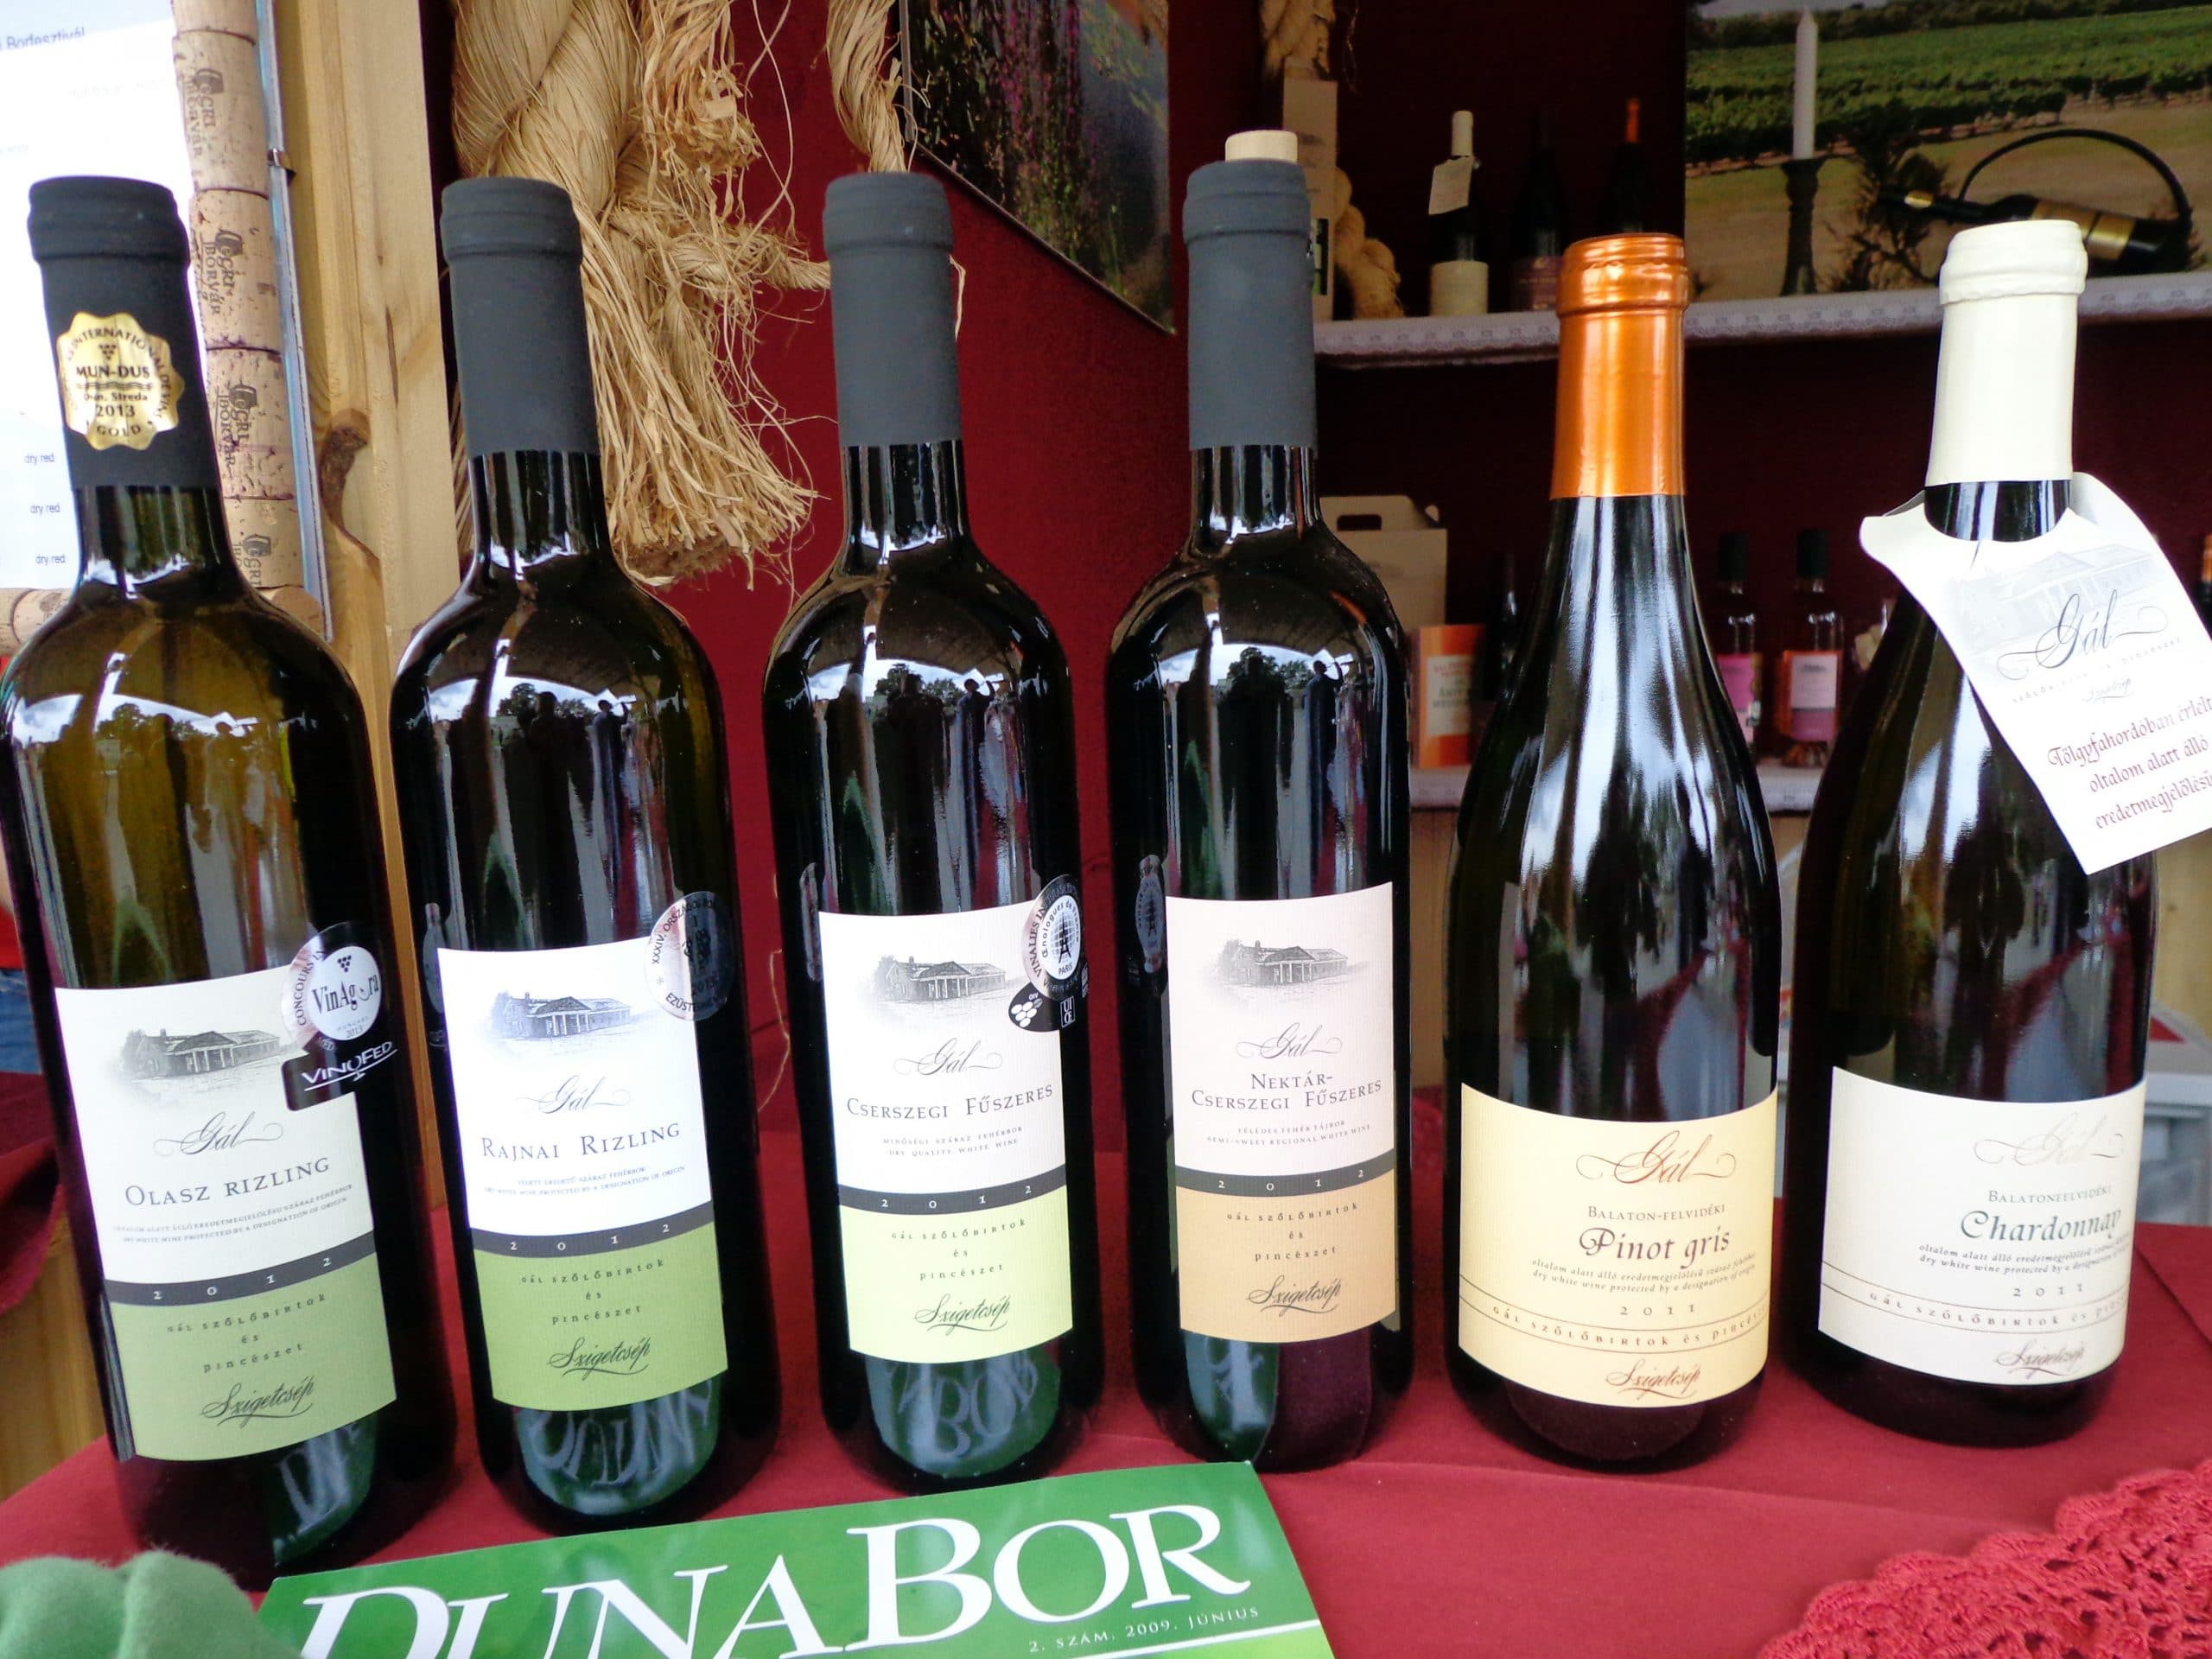 Wines from the Gál Winery